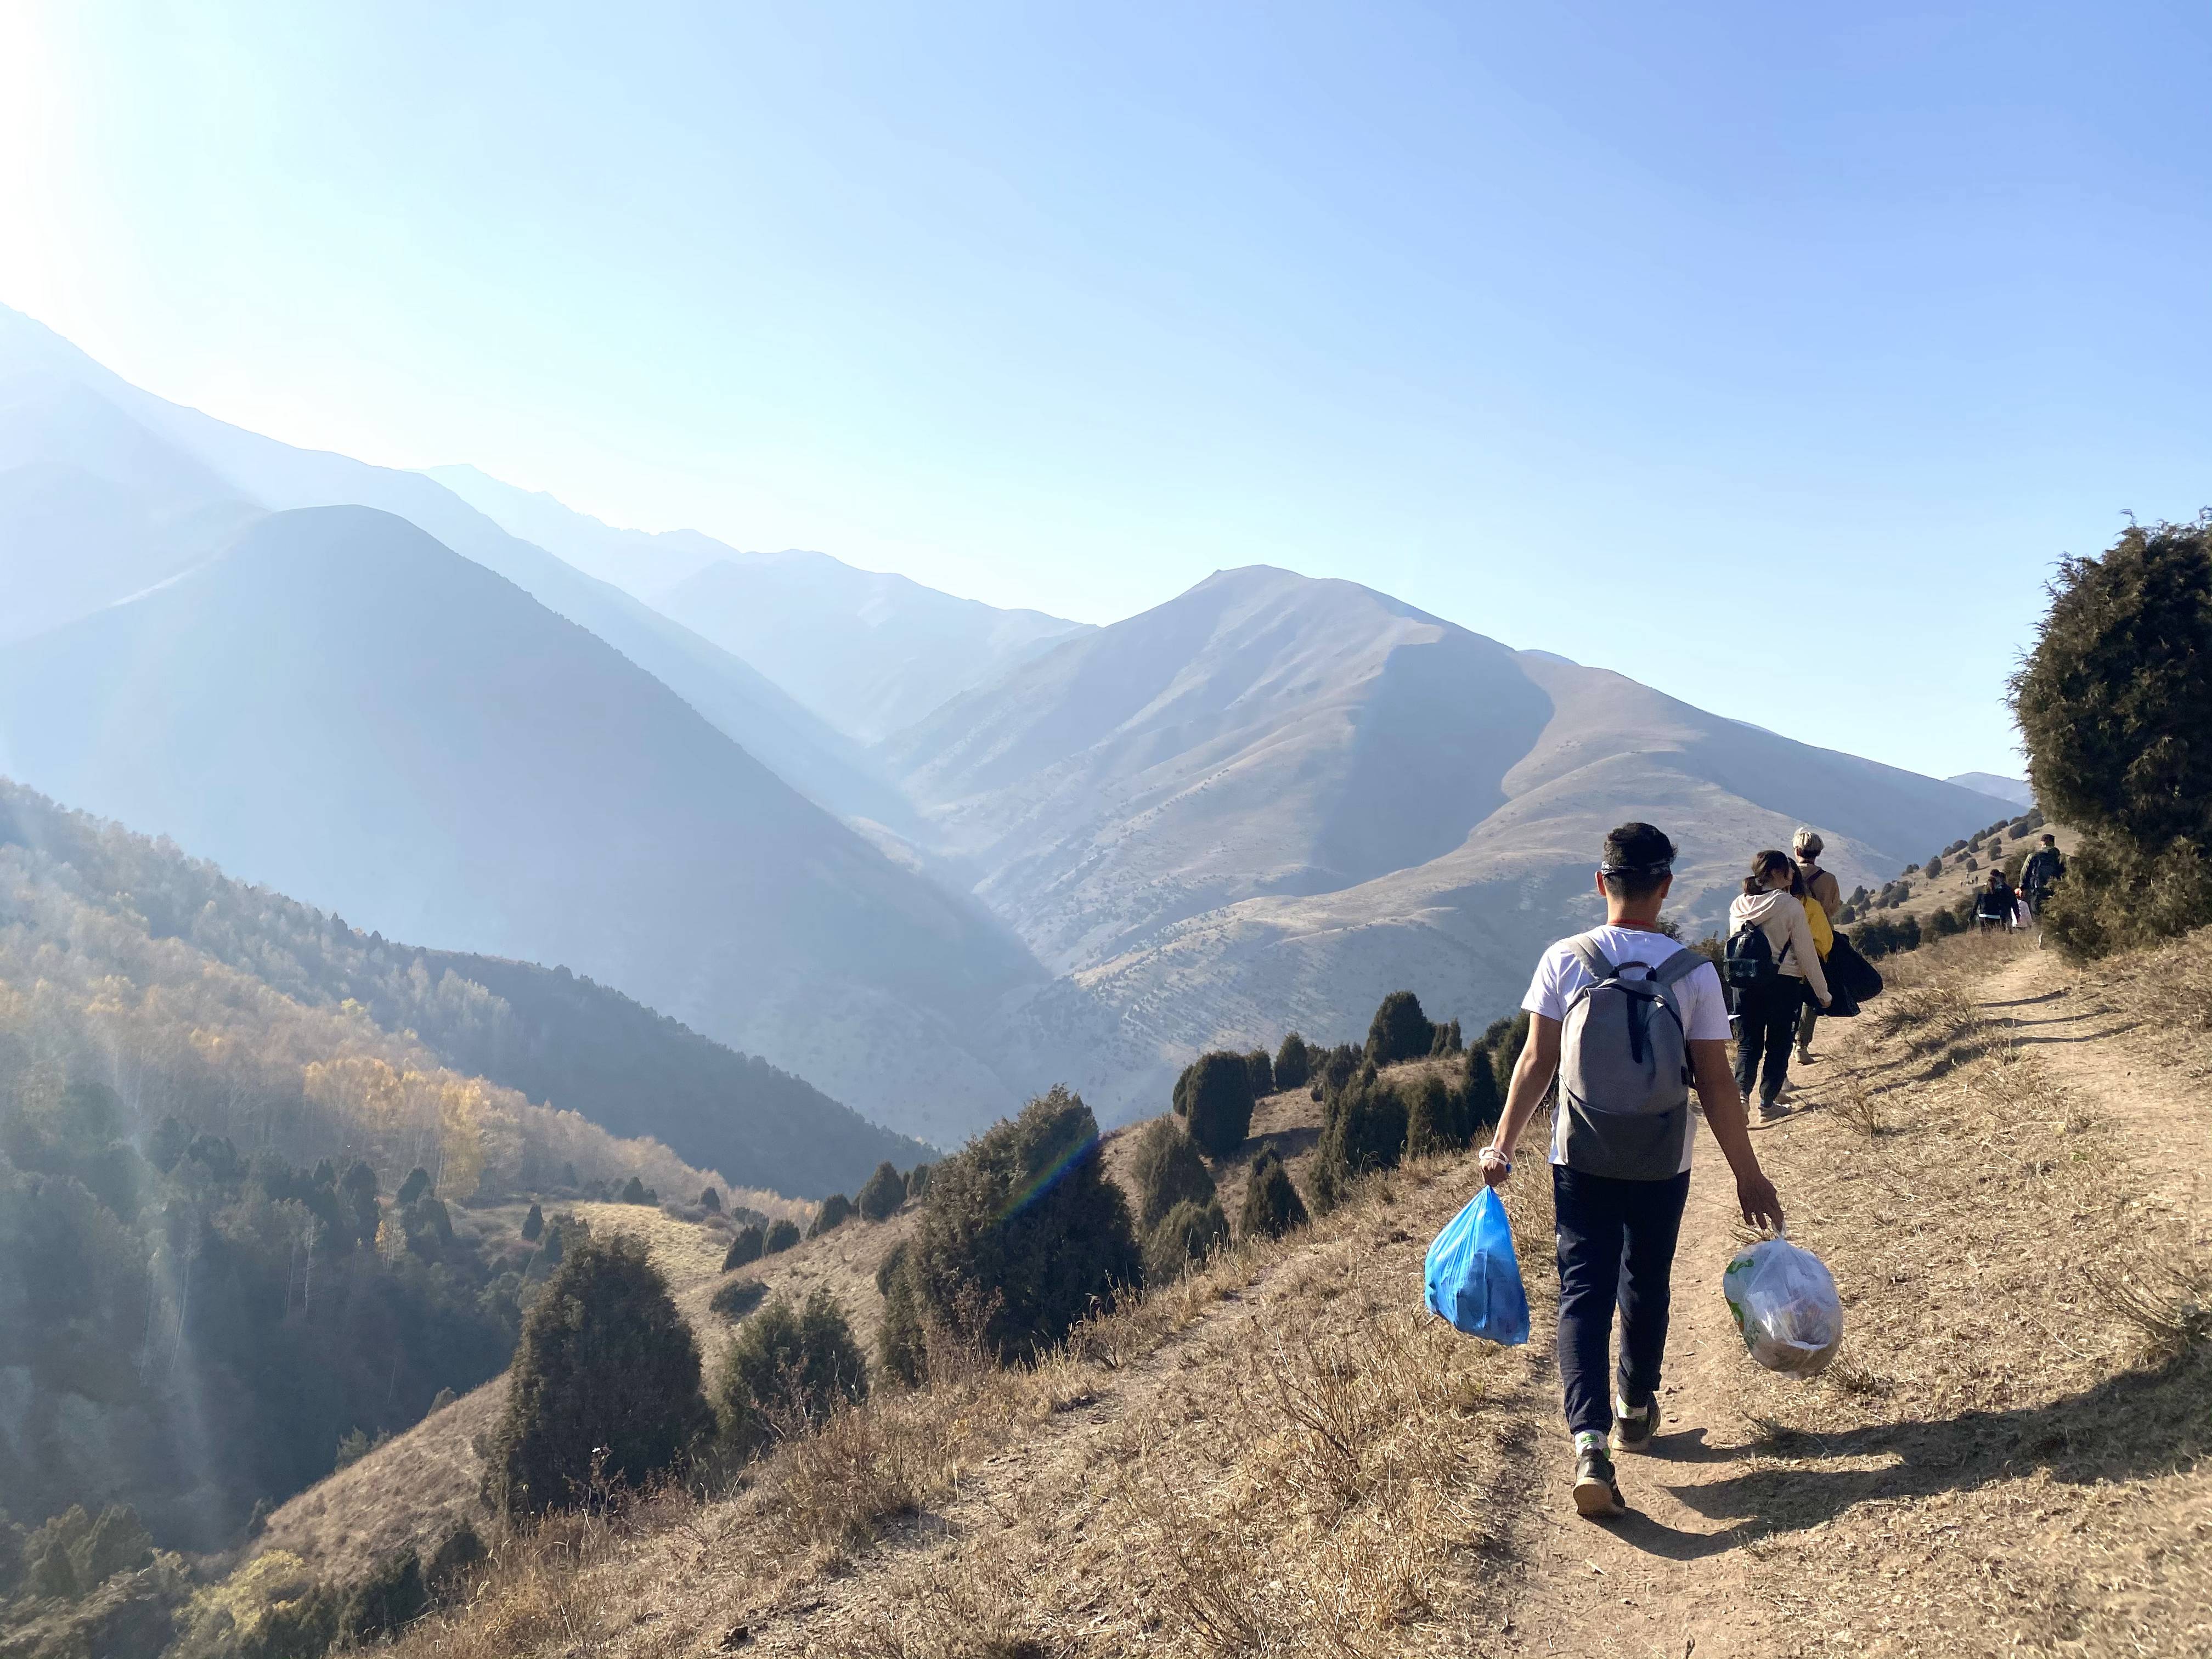 SAKTA: A New Eco-tourism Movement Led by Youths is on the Rise in Kyrgyzstan